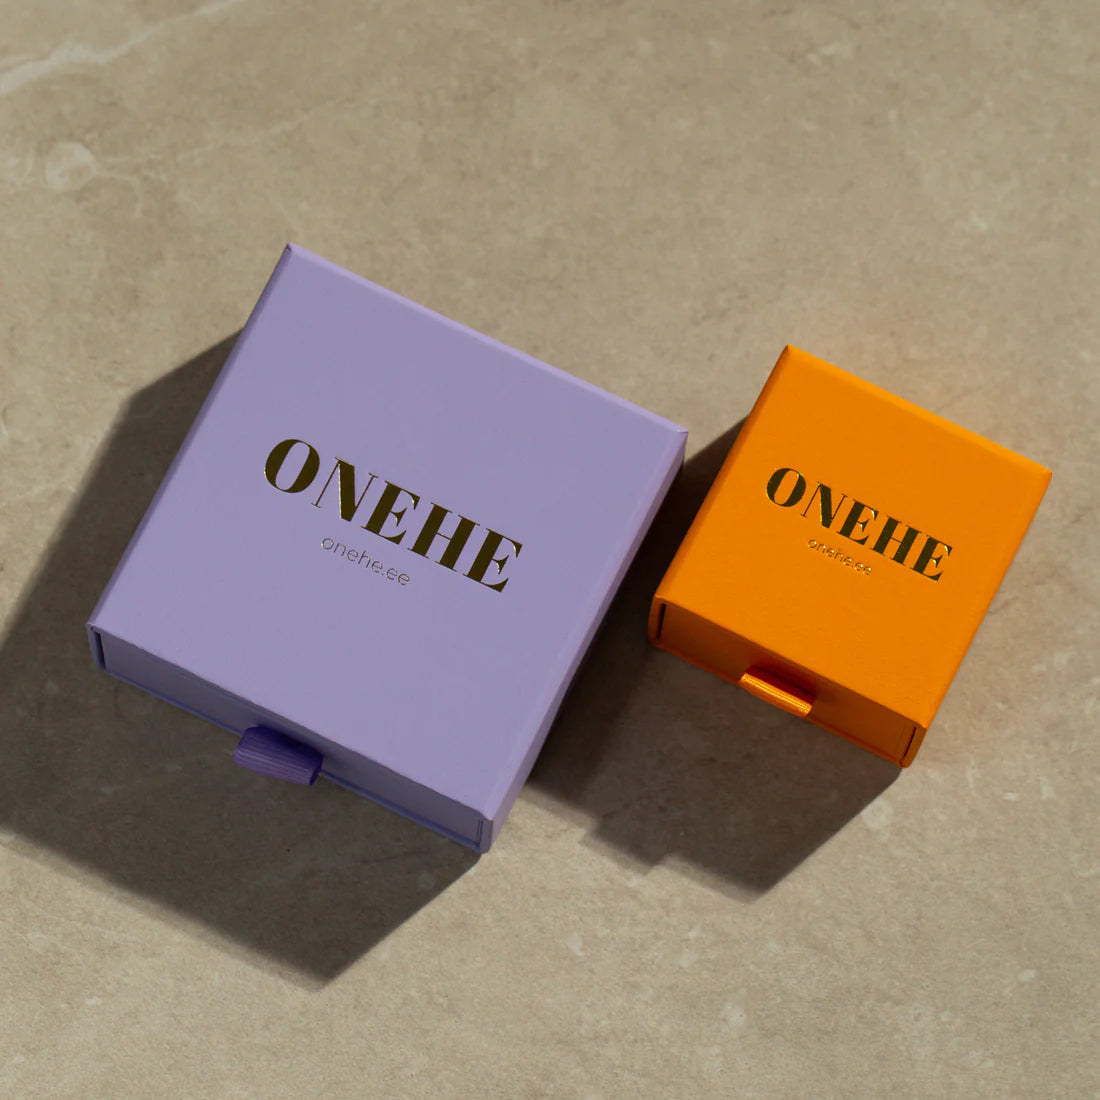 Resizable Ring POLARIS - Silver displayed on two boxes, one purple with a yellow object, the other orange with text. Made of 925 sterling silver, hypoallergenic, minimalist design for all occasions.